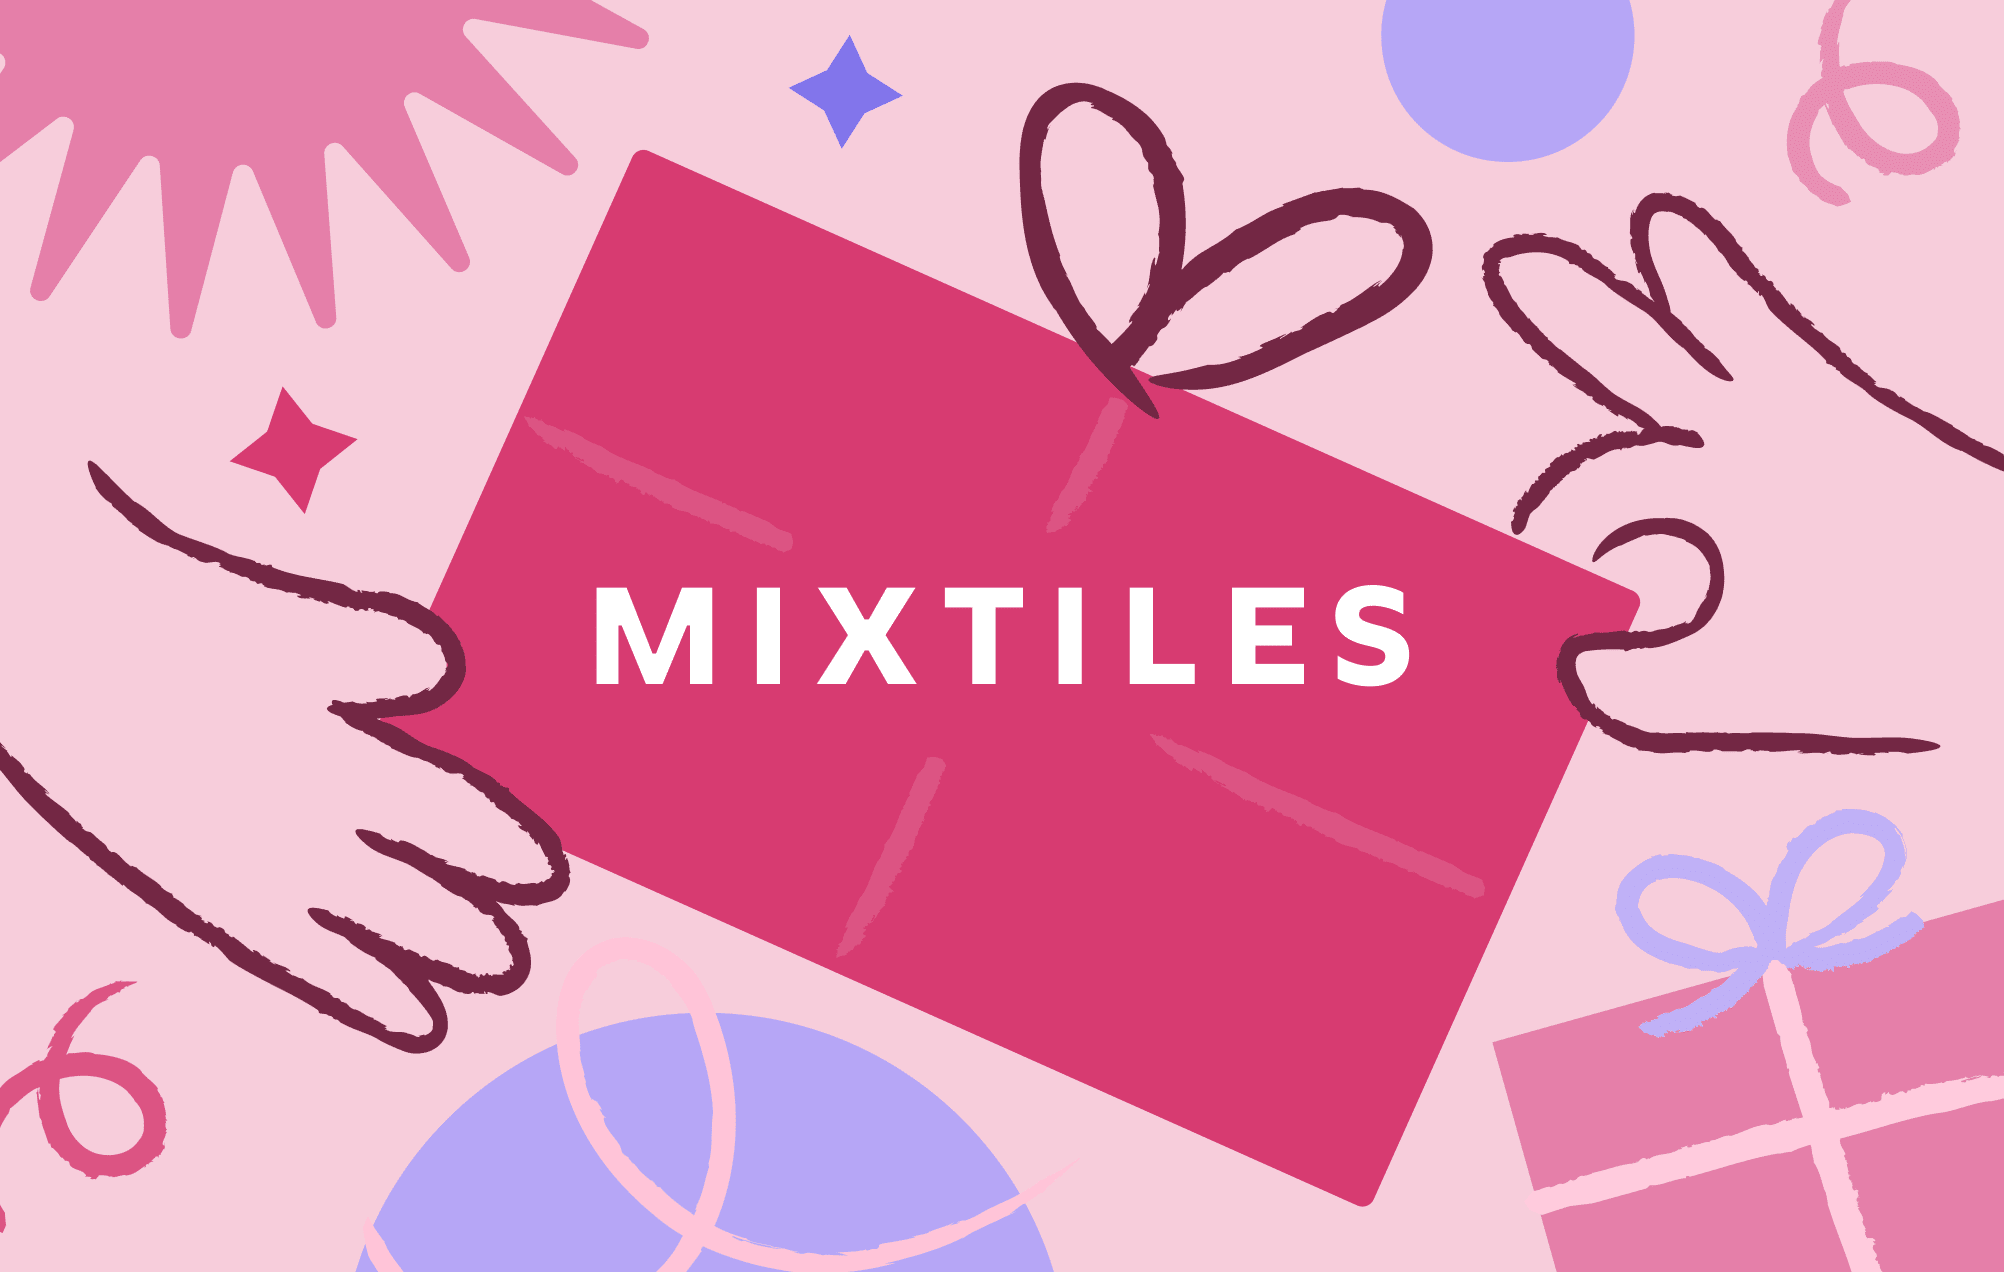 Mixtiles make a great Father's Day gift, and you can get 3 for $25